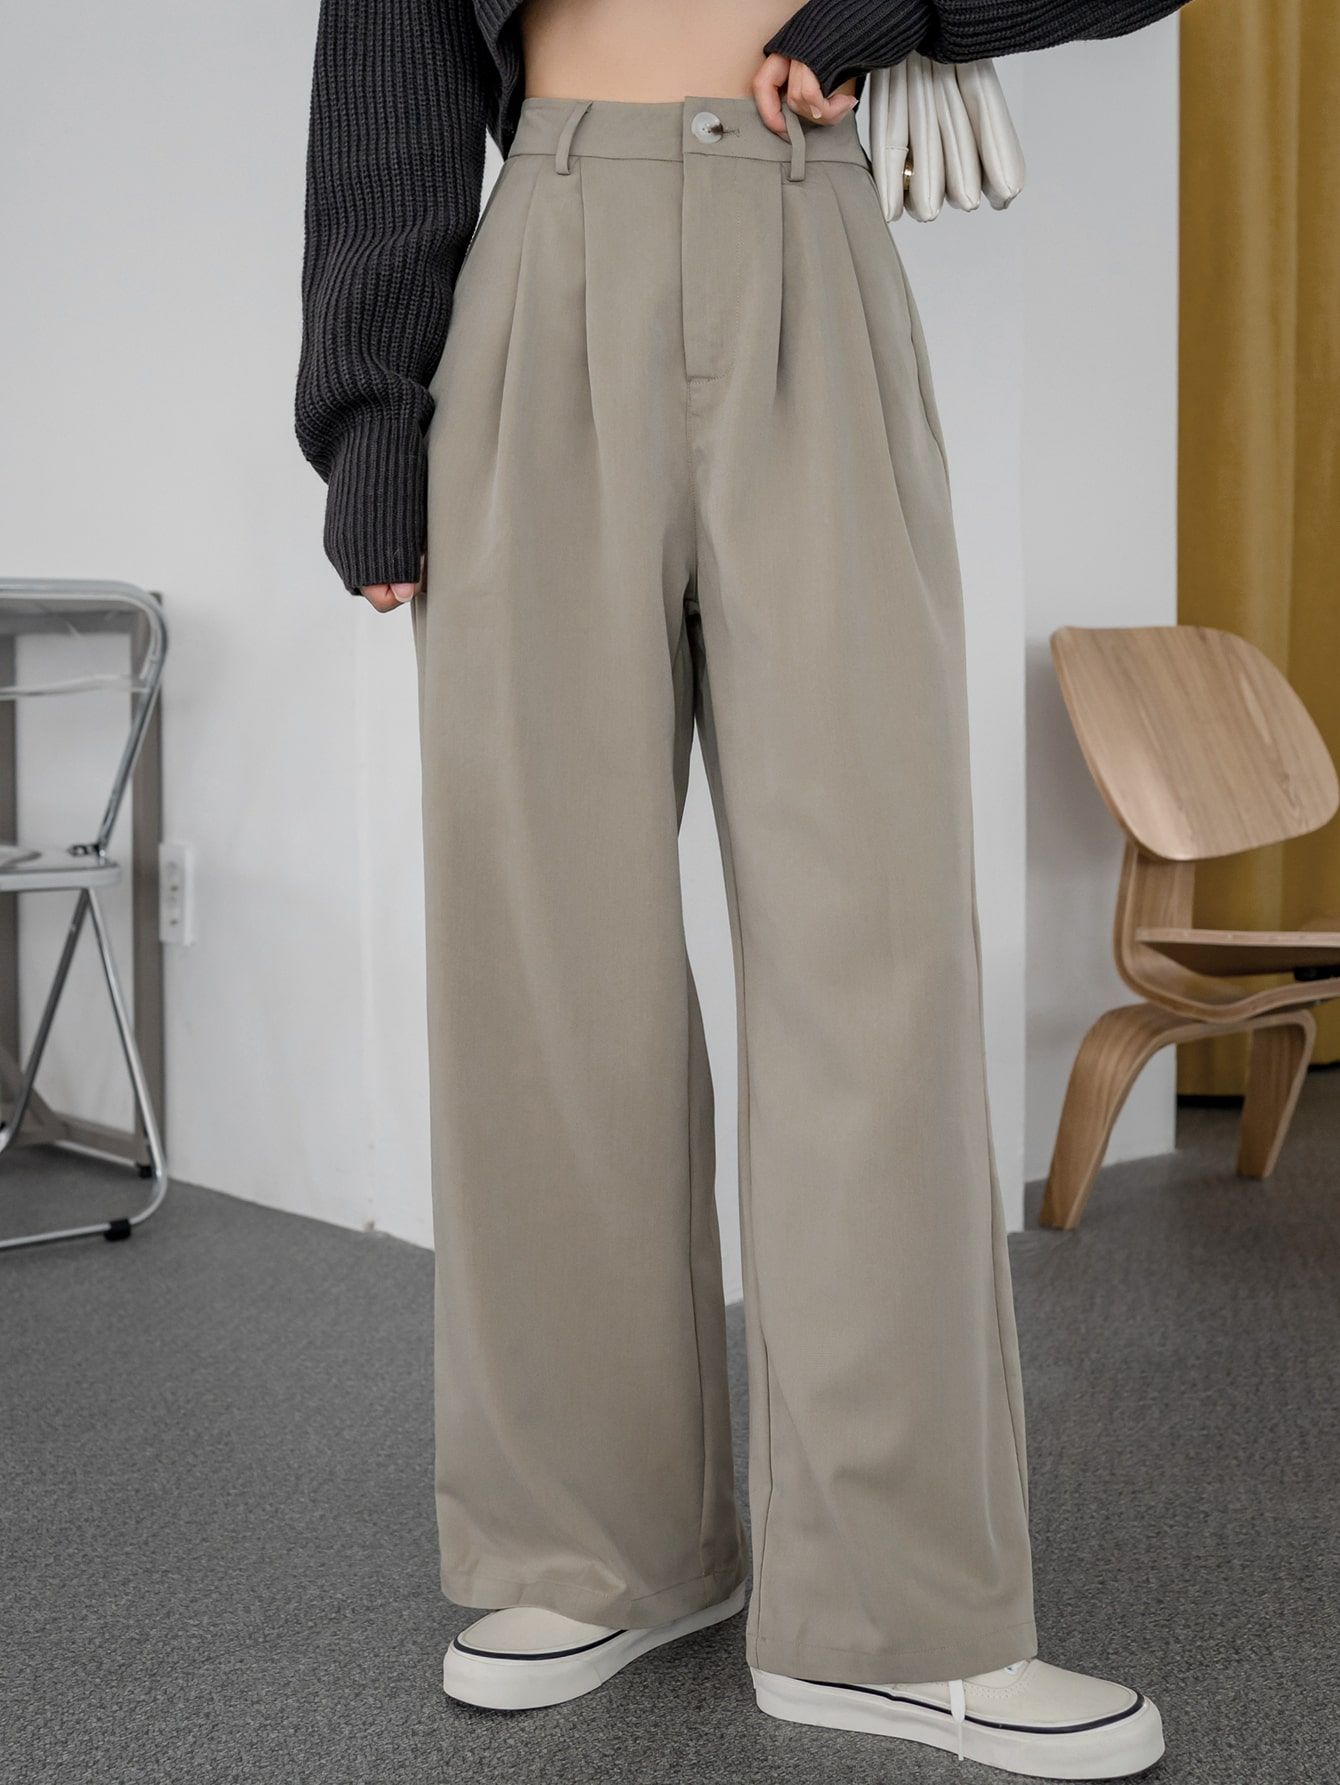 Formal Trousers: Classic and Timeless Bottoms for Formal Occasions